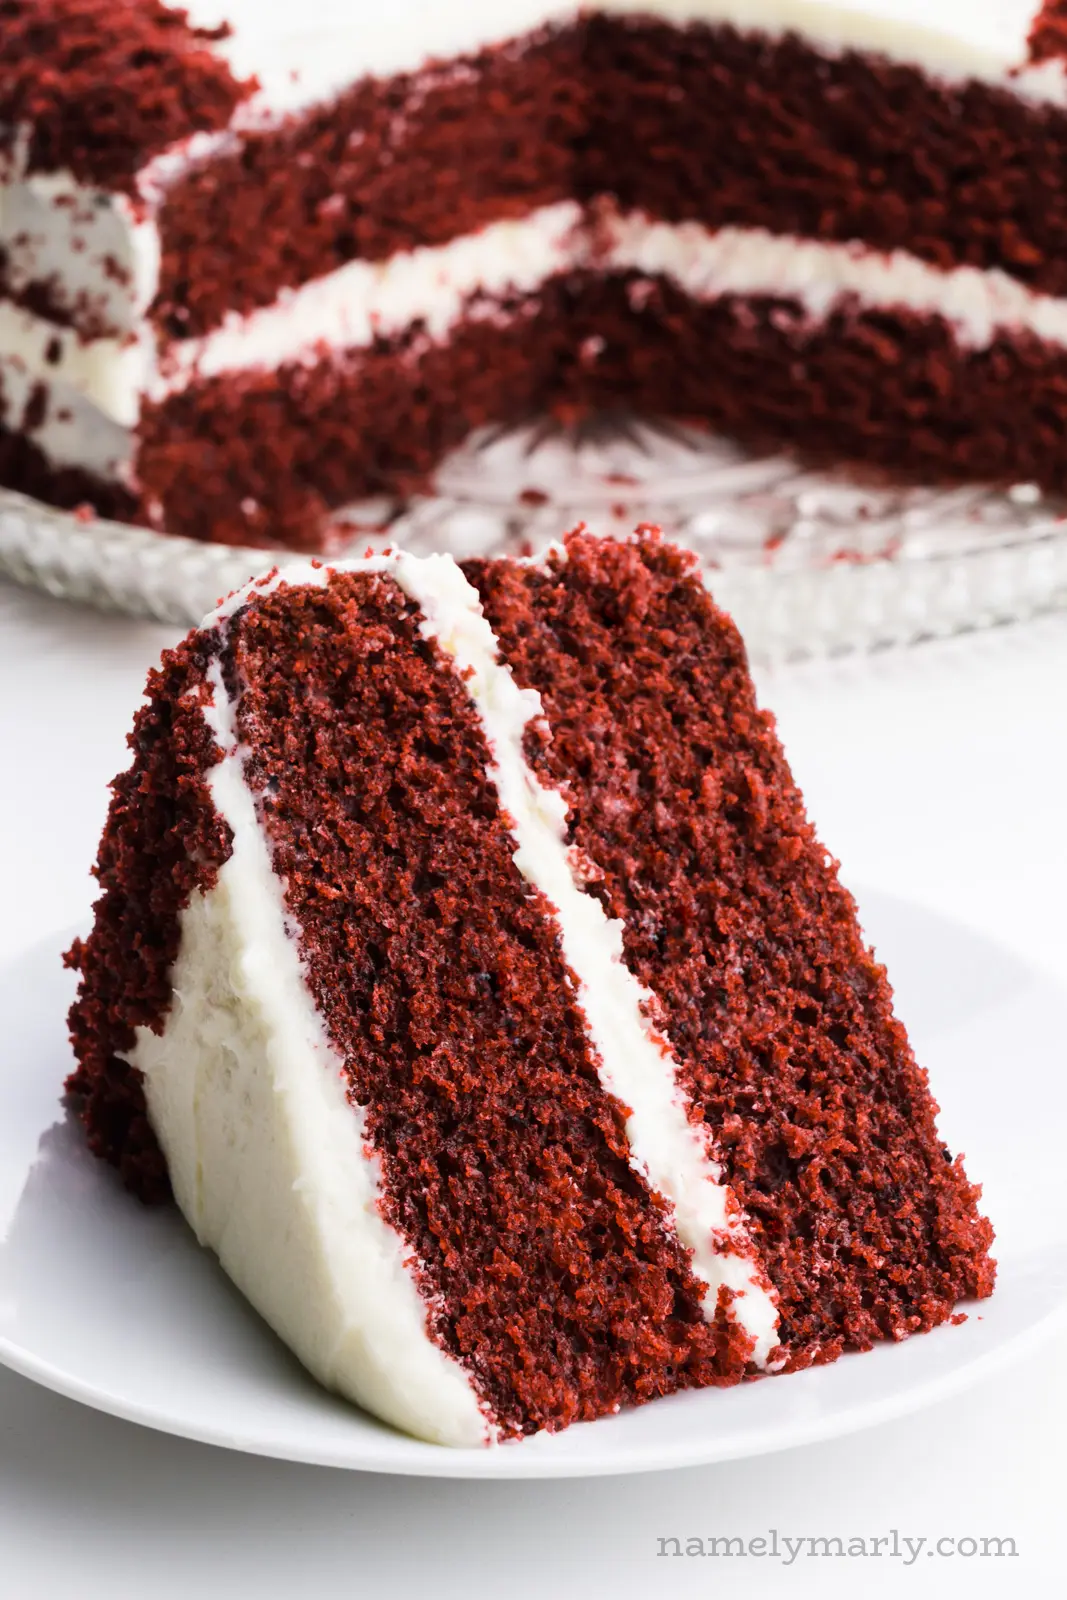 A slice of red velvet cake on a plate in front of the rest of the cake.